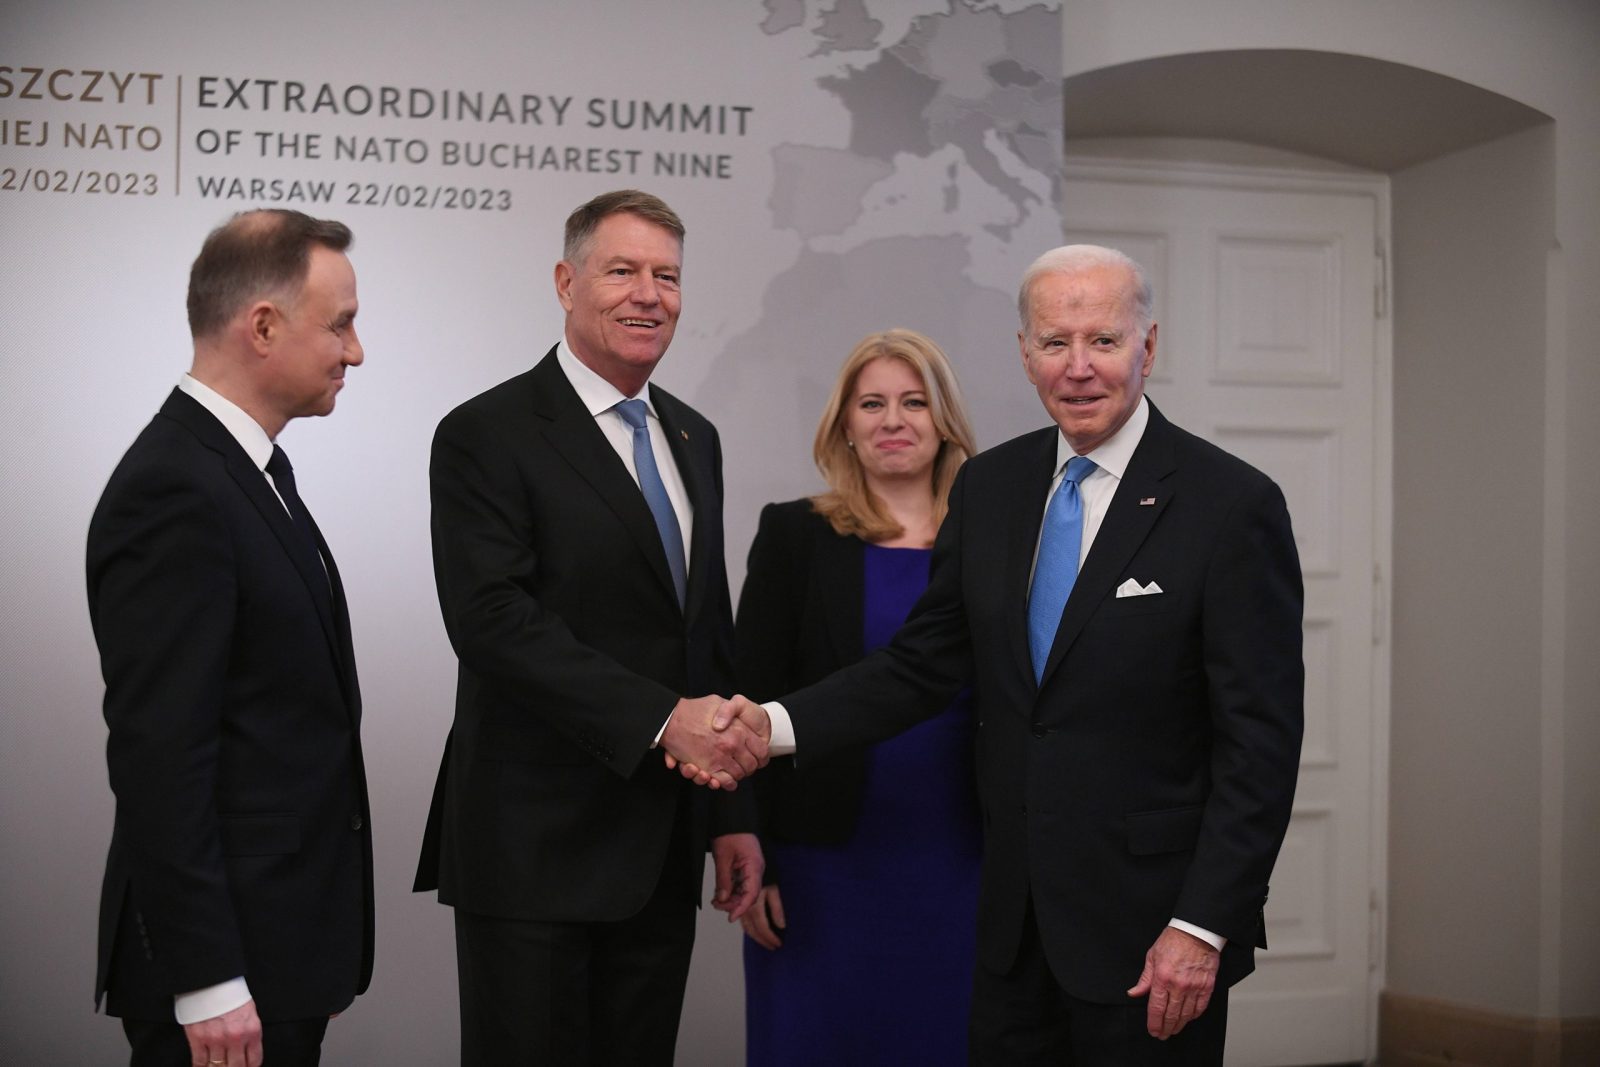 epa10483626 (L-R) Poland's President Andrzej Duda, Romania's Klaus Iohannis, Slovakia's Zuzana Caputova United States' Joe Biden pose for a photo ahead of the Bucharest Nine summit, at the Presidential Palace in Warsaw, Poland, 22 February 2023. The Bucharest Nine, also known as the B9, is an alliance of nine countries on NATO's so-called eastern flank. The meeting is expected to focus on strengthening NATO's eastern flank and further support for Ukraine, among other issues.  EPA/MARCIN OBARA POLAND OUT